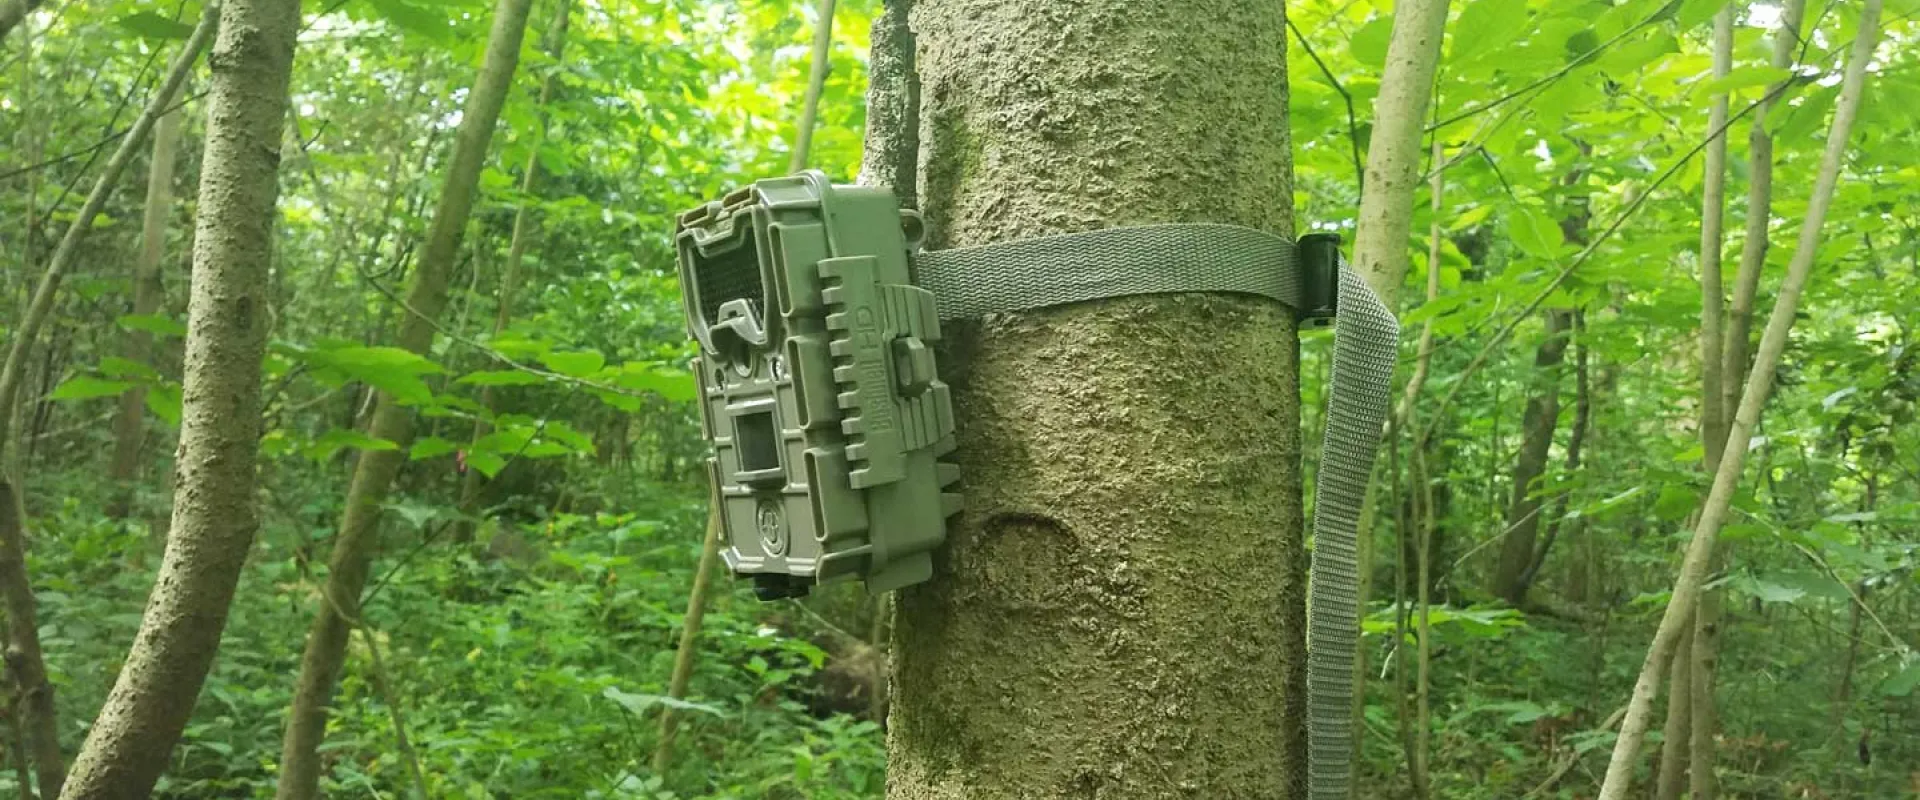 Camera Trapping for Conservation